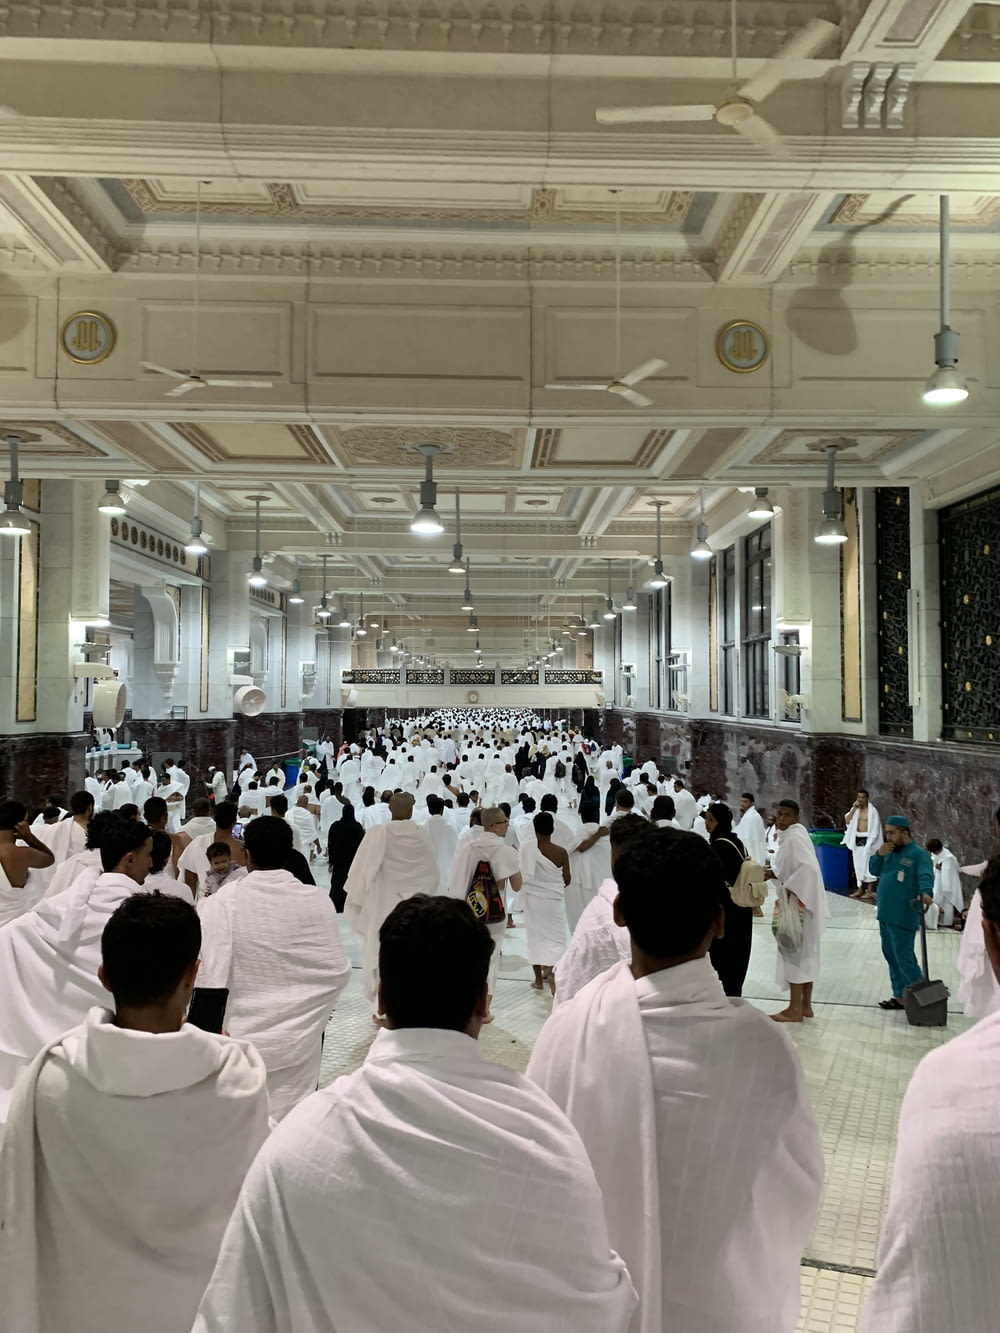 a group of people in white robes